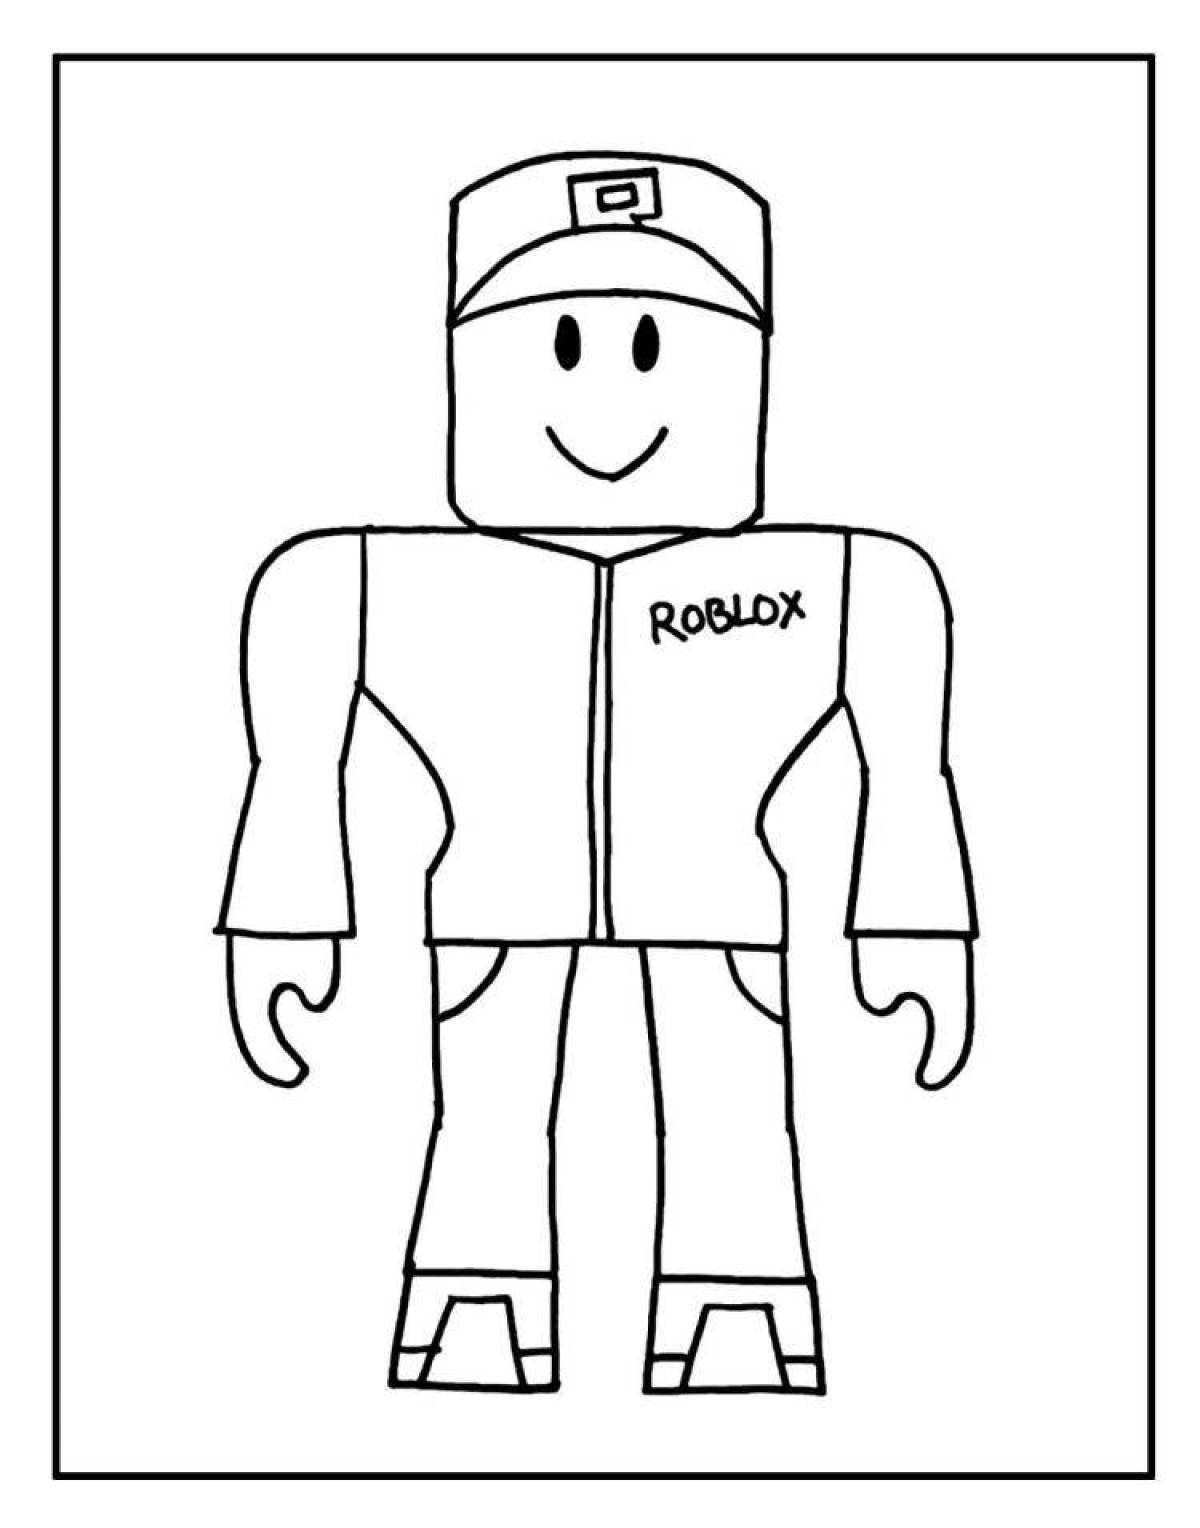 Roblox intriguing coloring game